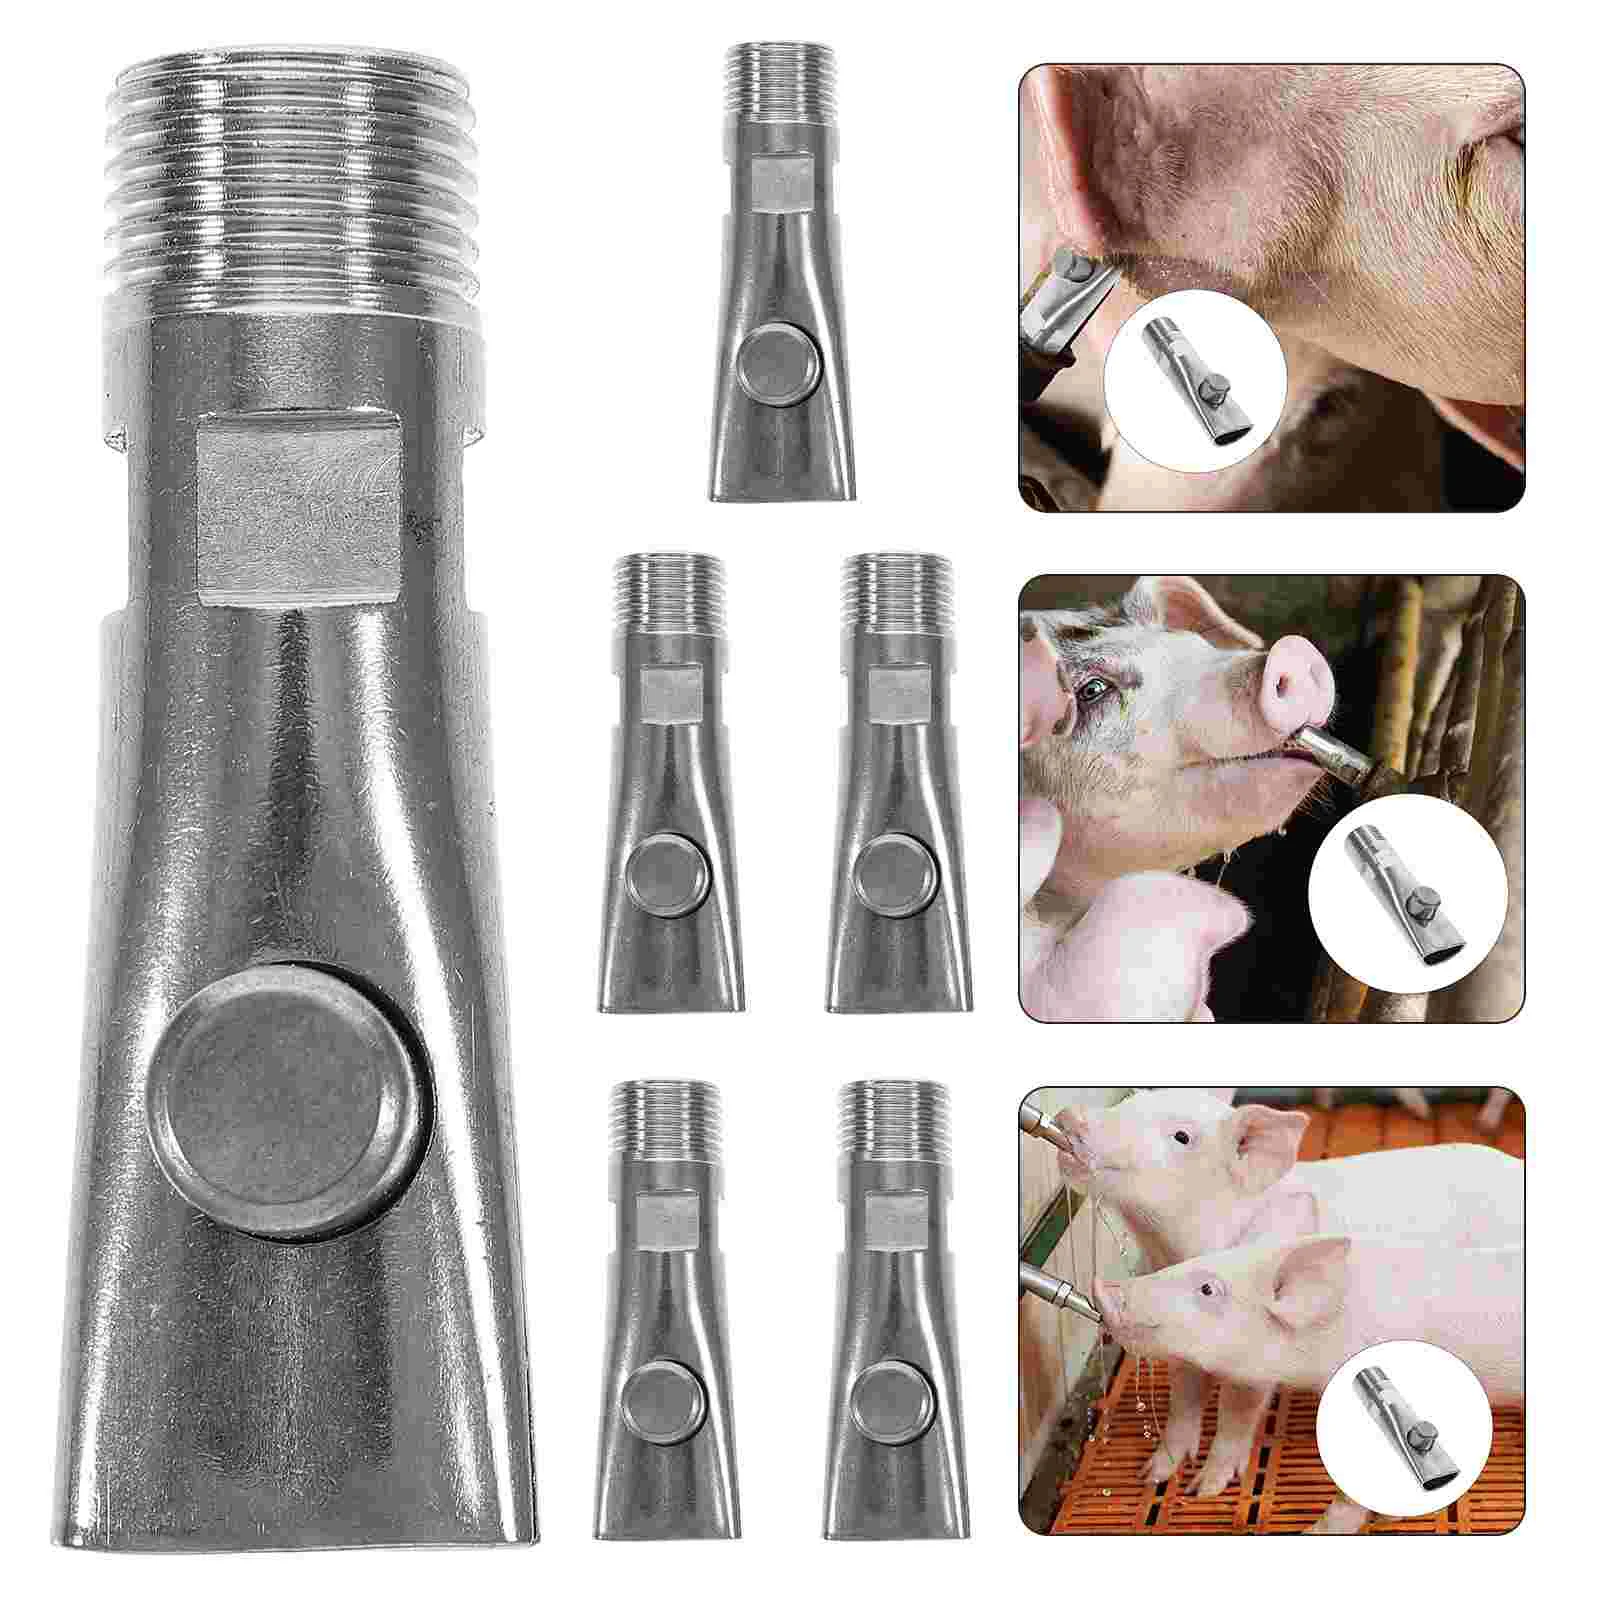 

5pcs Piglets Waterer Stainless Steel Feeders Livestock Automatic Waterer